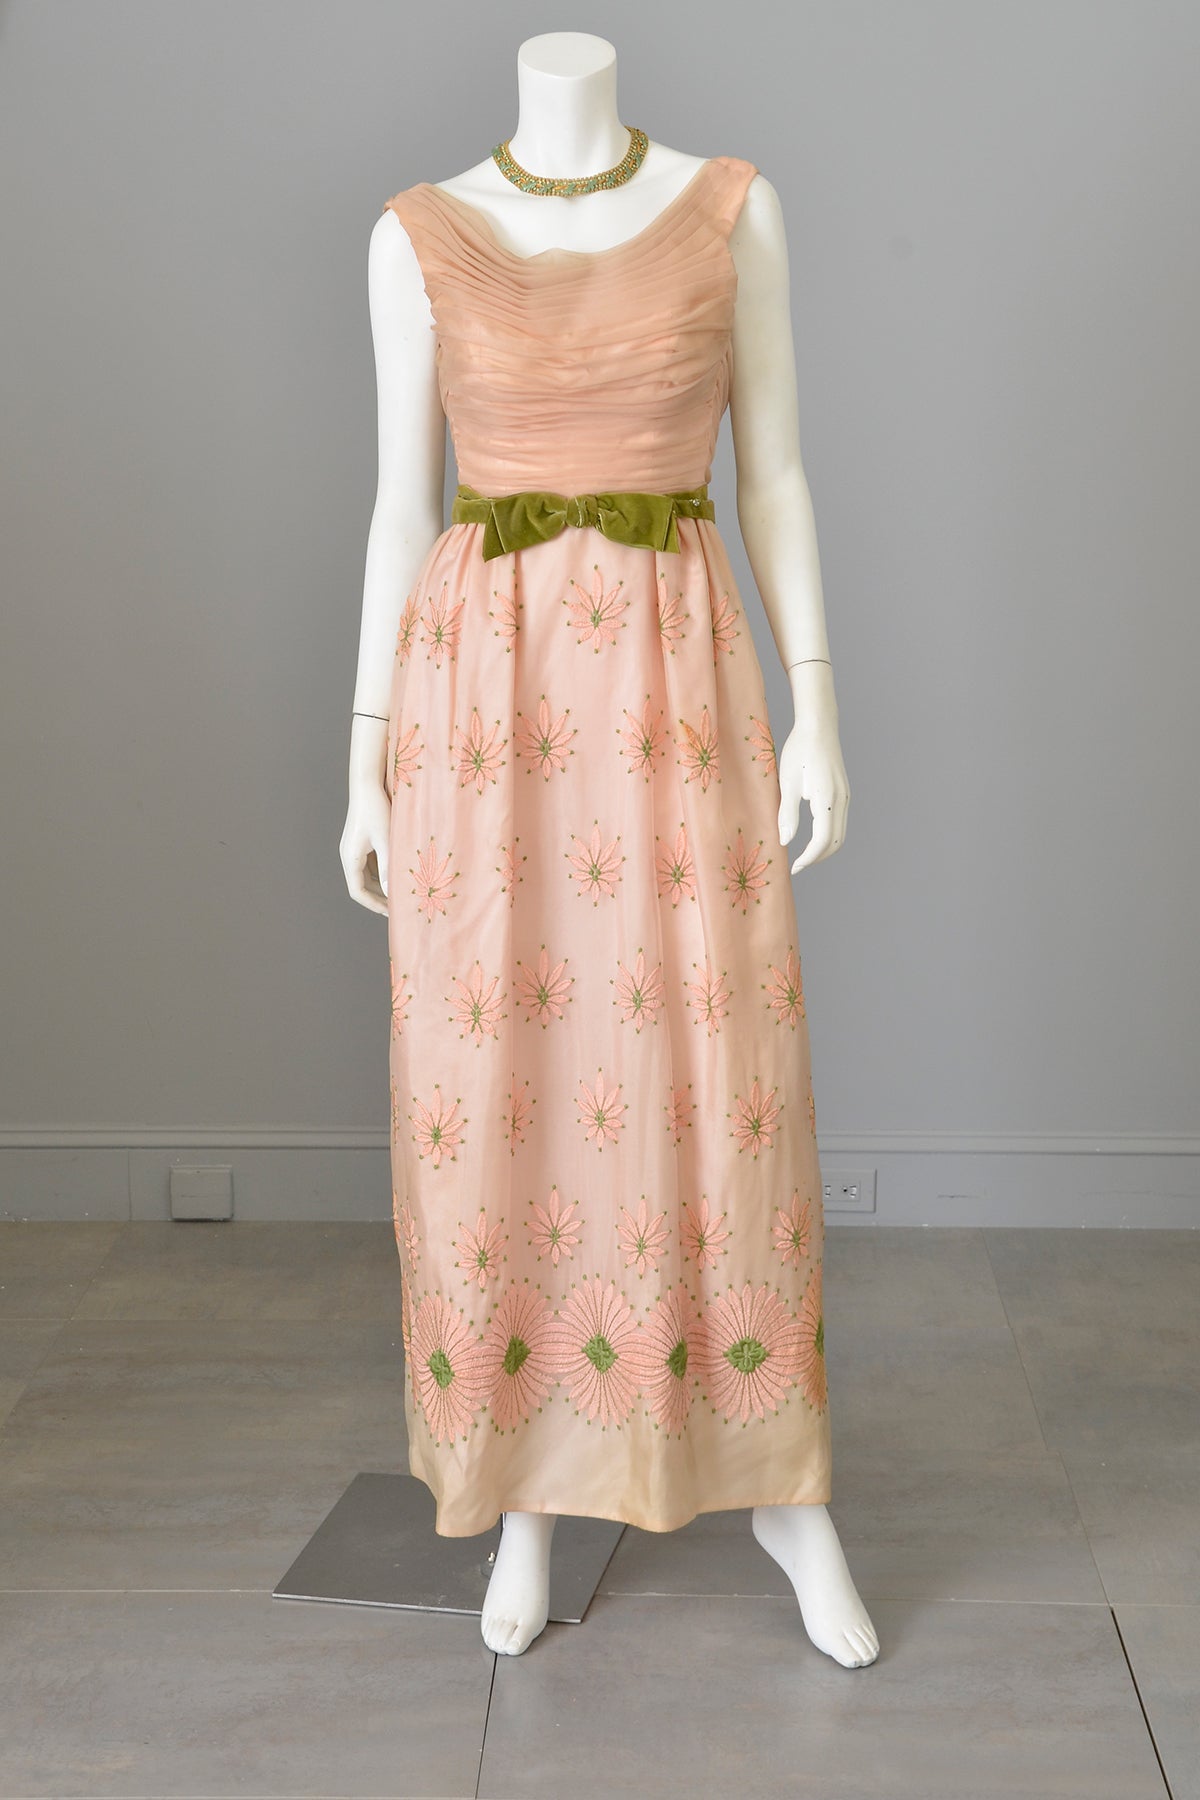 1960s Dusty Peach Pink Embroidered Ruched Gown | Vintage Bridesmaid or Prom Dress | XXS